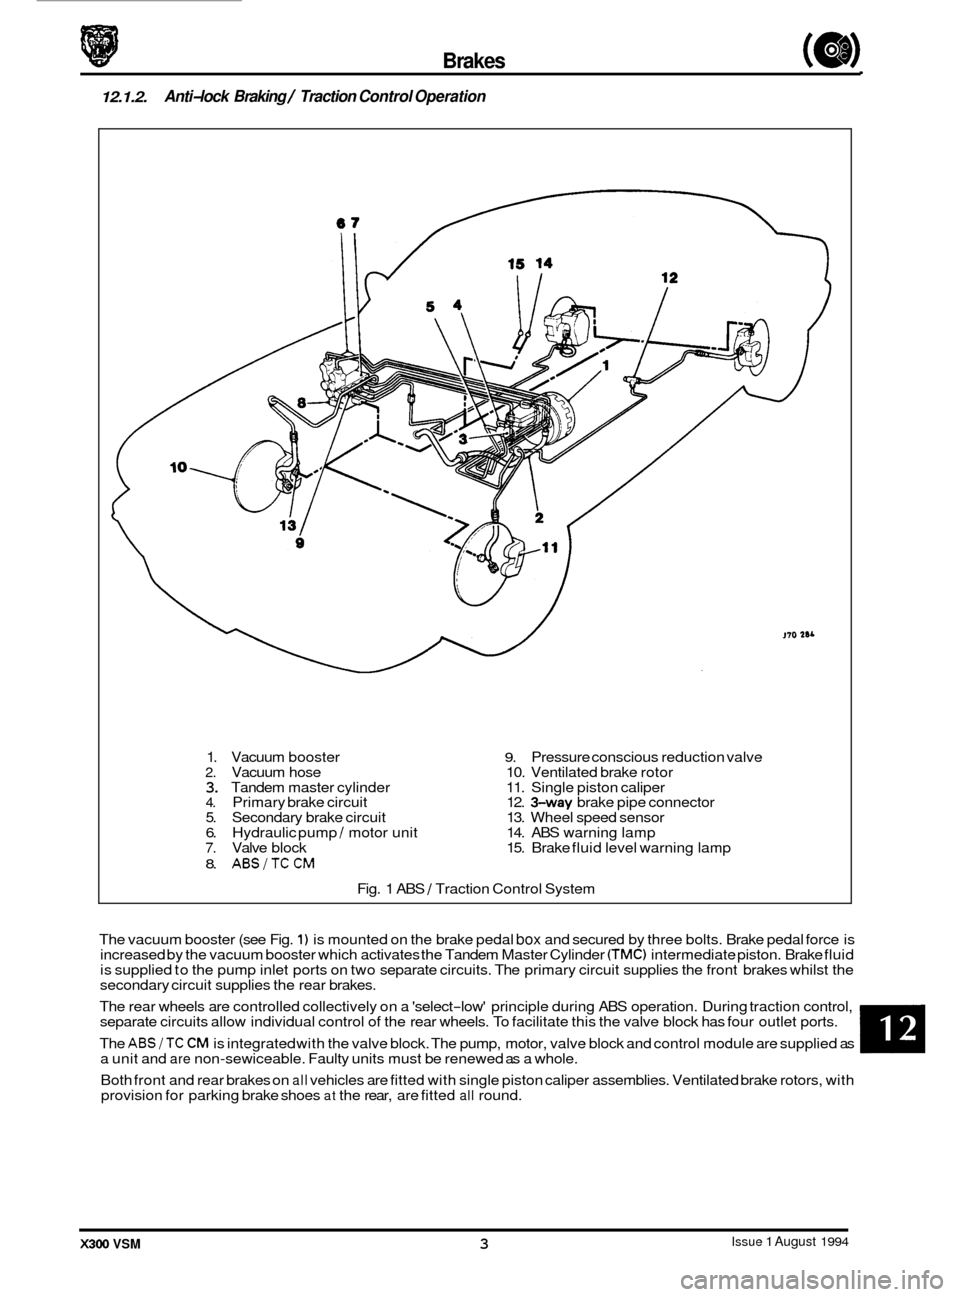 JAGUAR XJ6 1994 2.G Workshop Manual Brakes (a) 
12.1.2. Anti-lock Braking / Traction  Control Operation 
The rear  wheels  are controlled collectively  on a select-low  principle during  ABS operation.  During traction  control, 
sepa